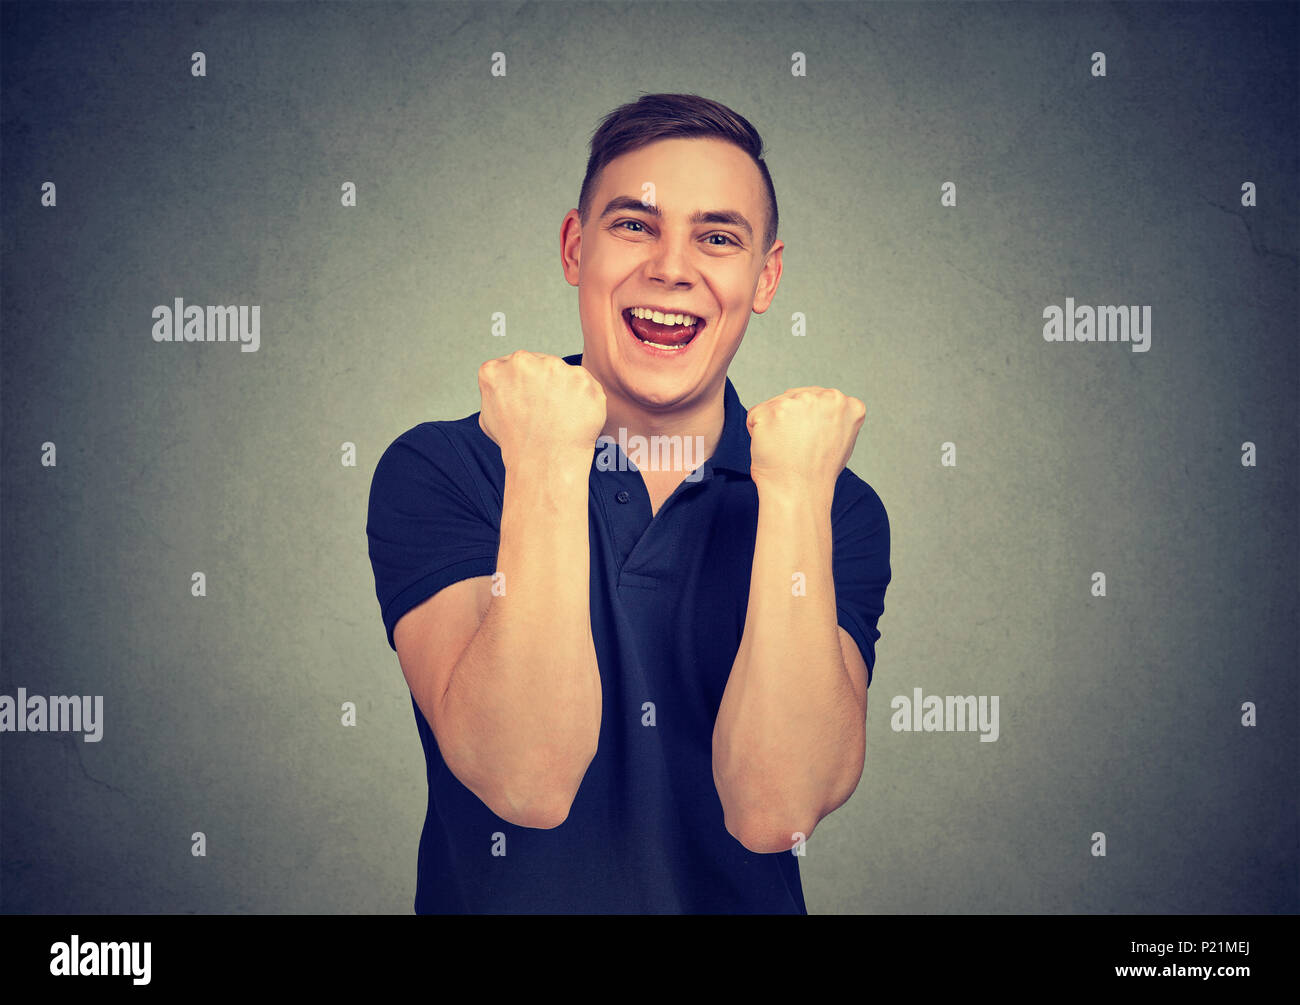 Successful student, man winning celebrating success isolated on gray wall background. Positive human emotion facial expression. Life perception Stock Photo